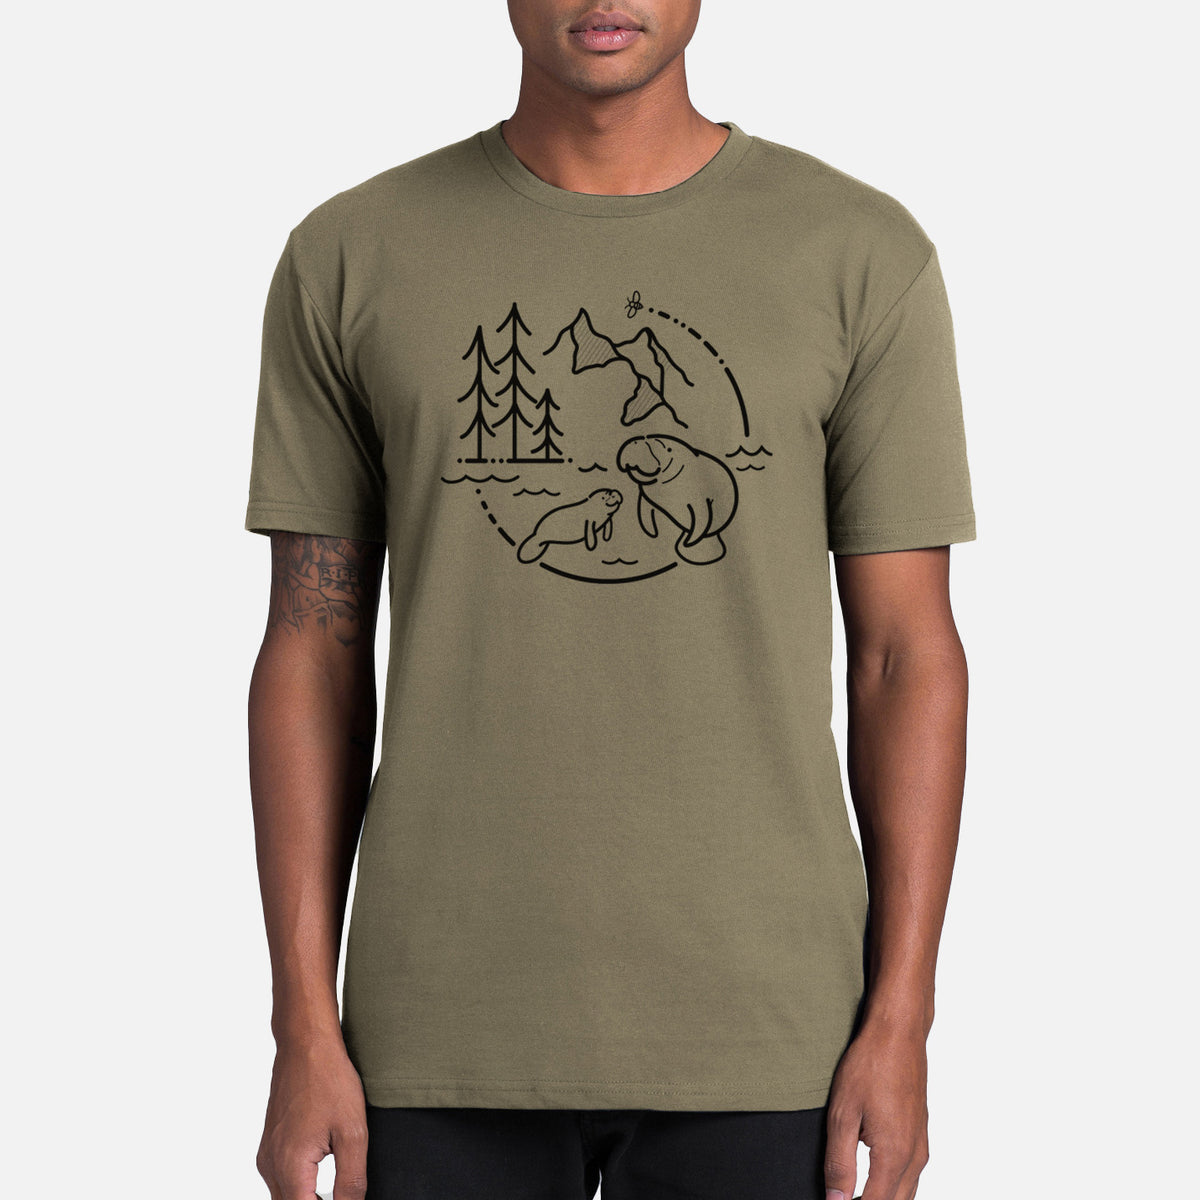 It&#39;s All Connected - Manatee - Mens Everyday Staple Tee